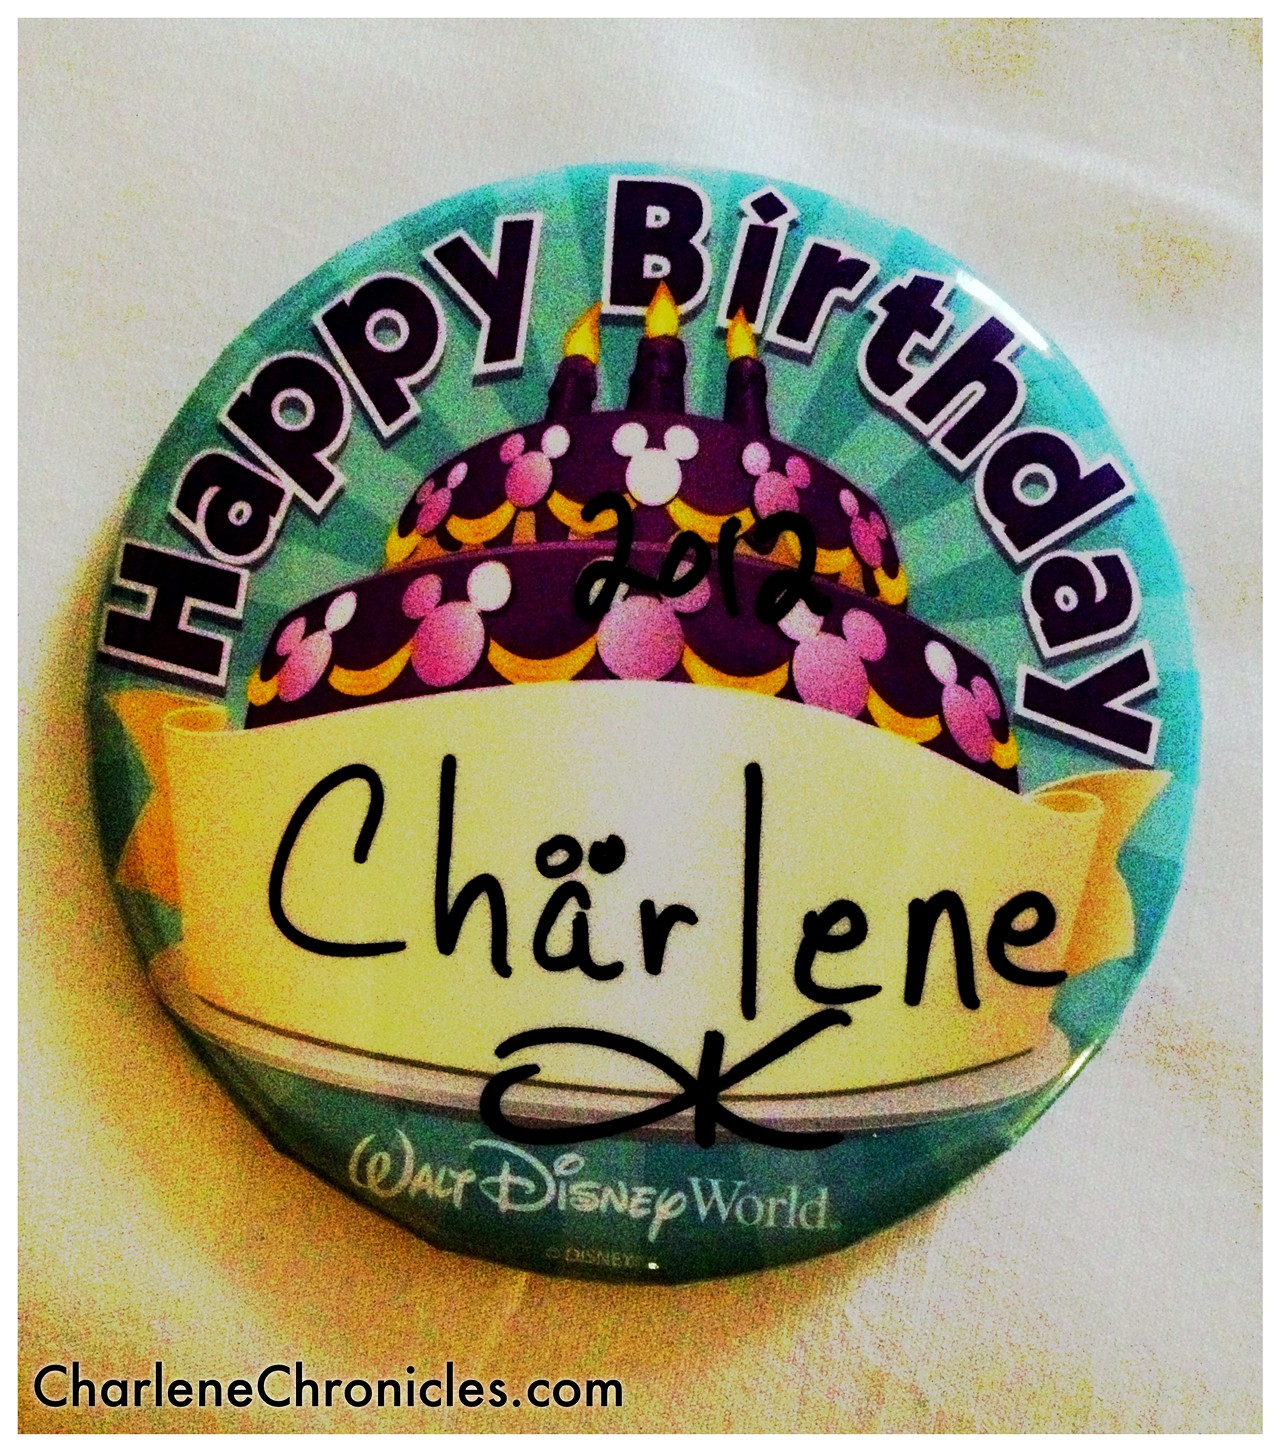 Disney gives away free birthday swag, such as this glorious pin.